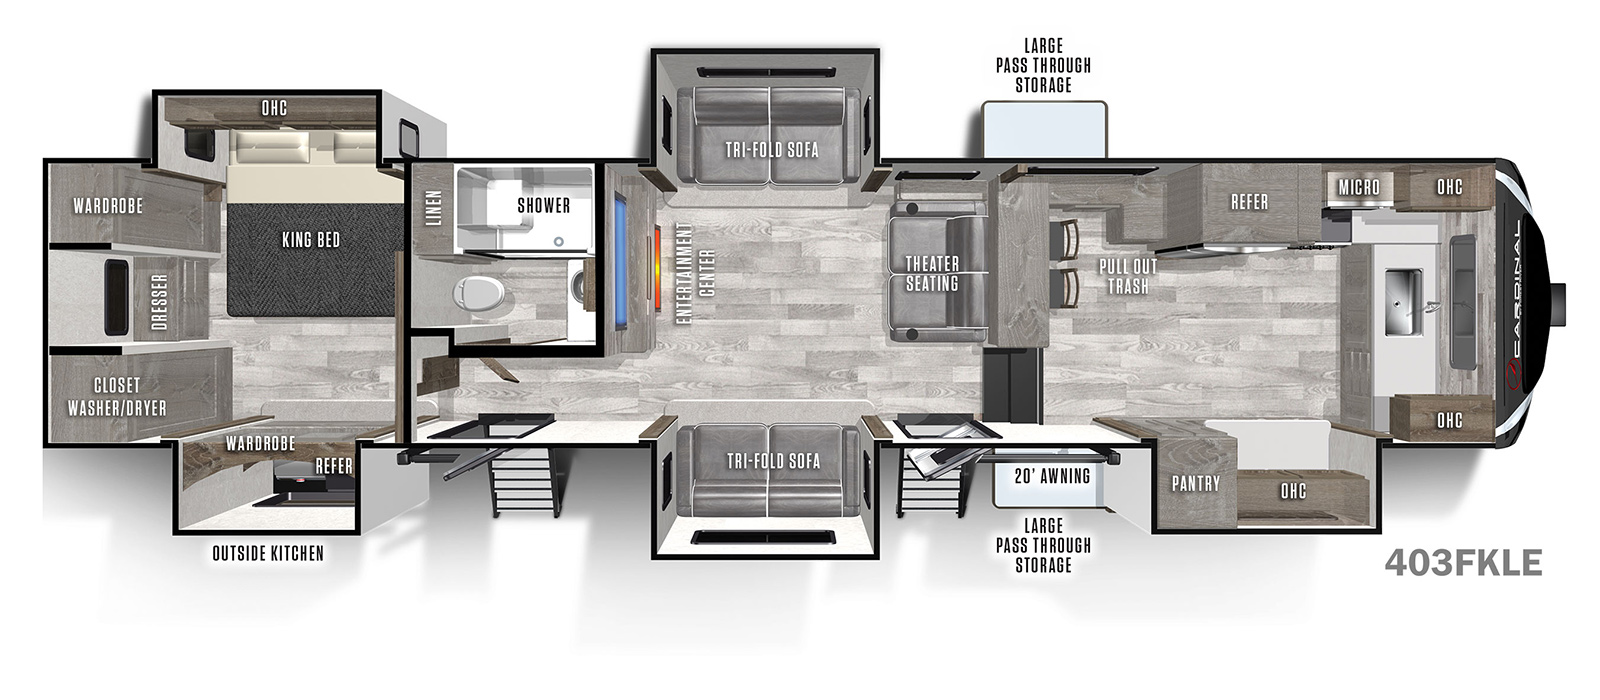 The 403 FKLE has five slide outs, two on the off-door side and three on the door side, along worth two entry doors on the door side. Interior layout from front to back: front kitchen with door side slide out holding a pantry, countertop and overhead cabinet; bar with bar stools in the kitchen; living area with rear facing theater seating across from entertainment center; off-door side slide out with trifold sofa and door side slide out with trifold sofa; side aisle bathroom; rear bedroom with king bed off-door side slide out and door side slide out.